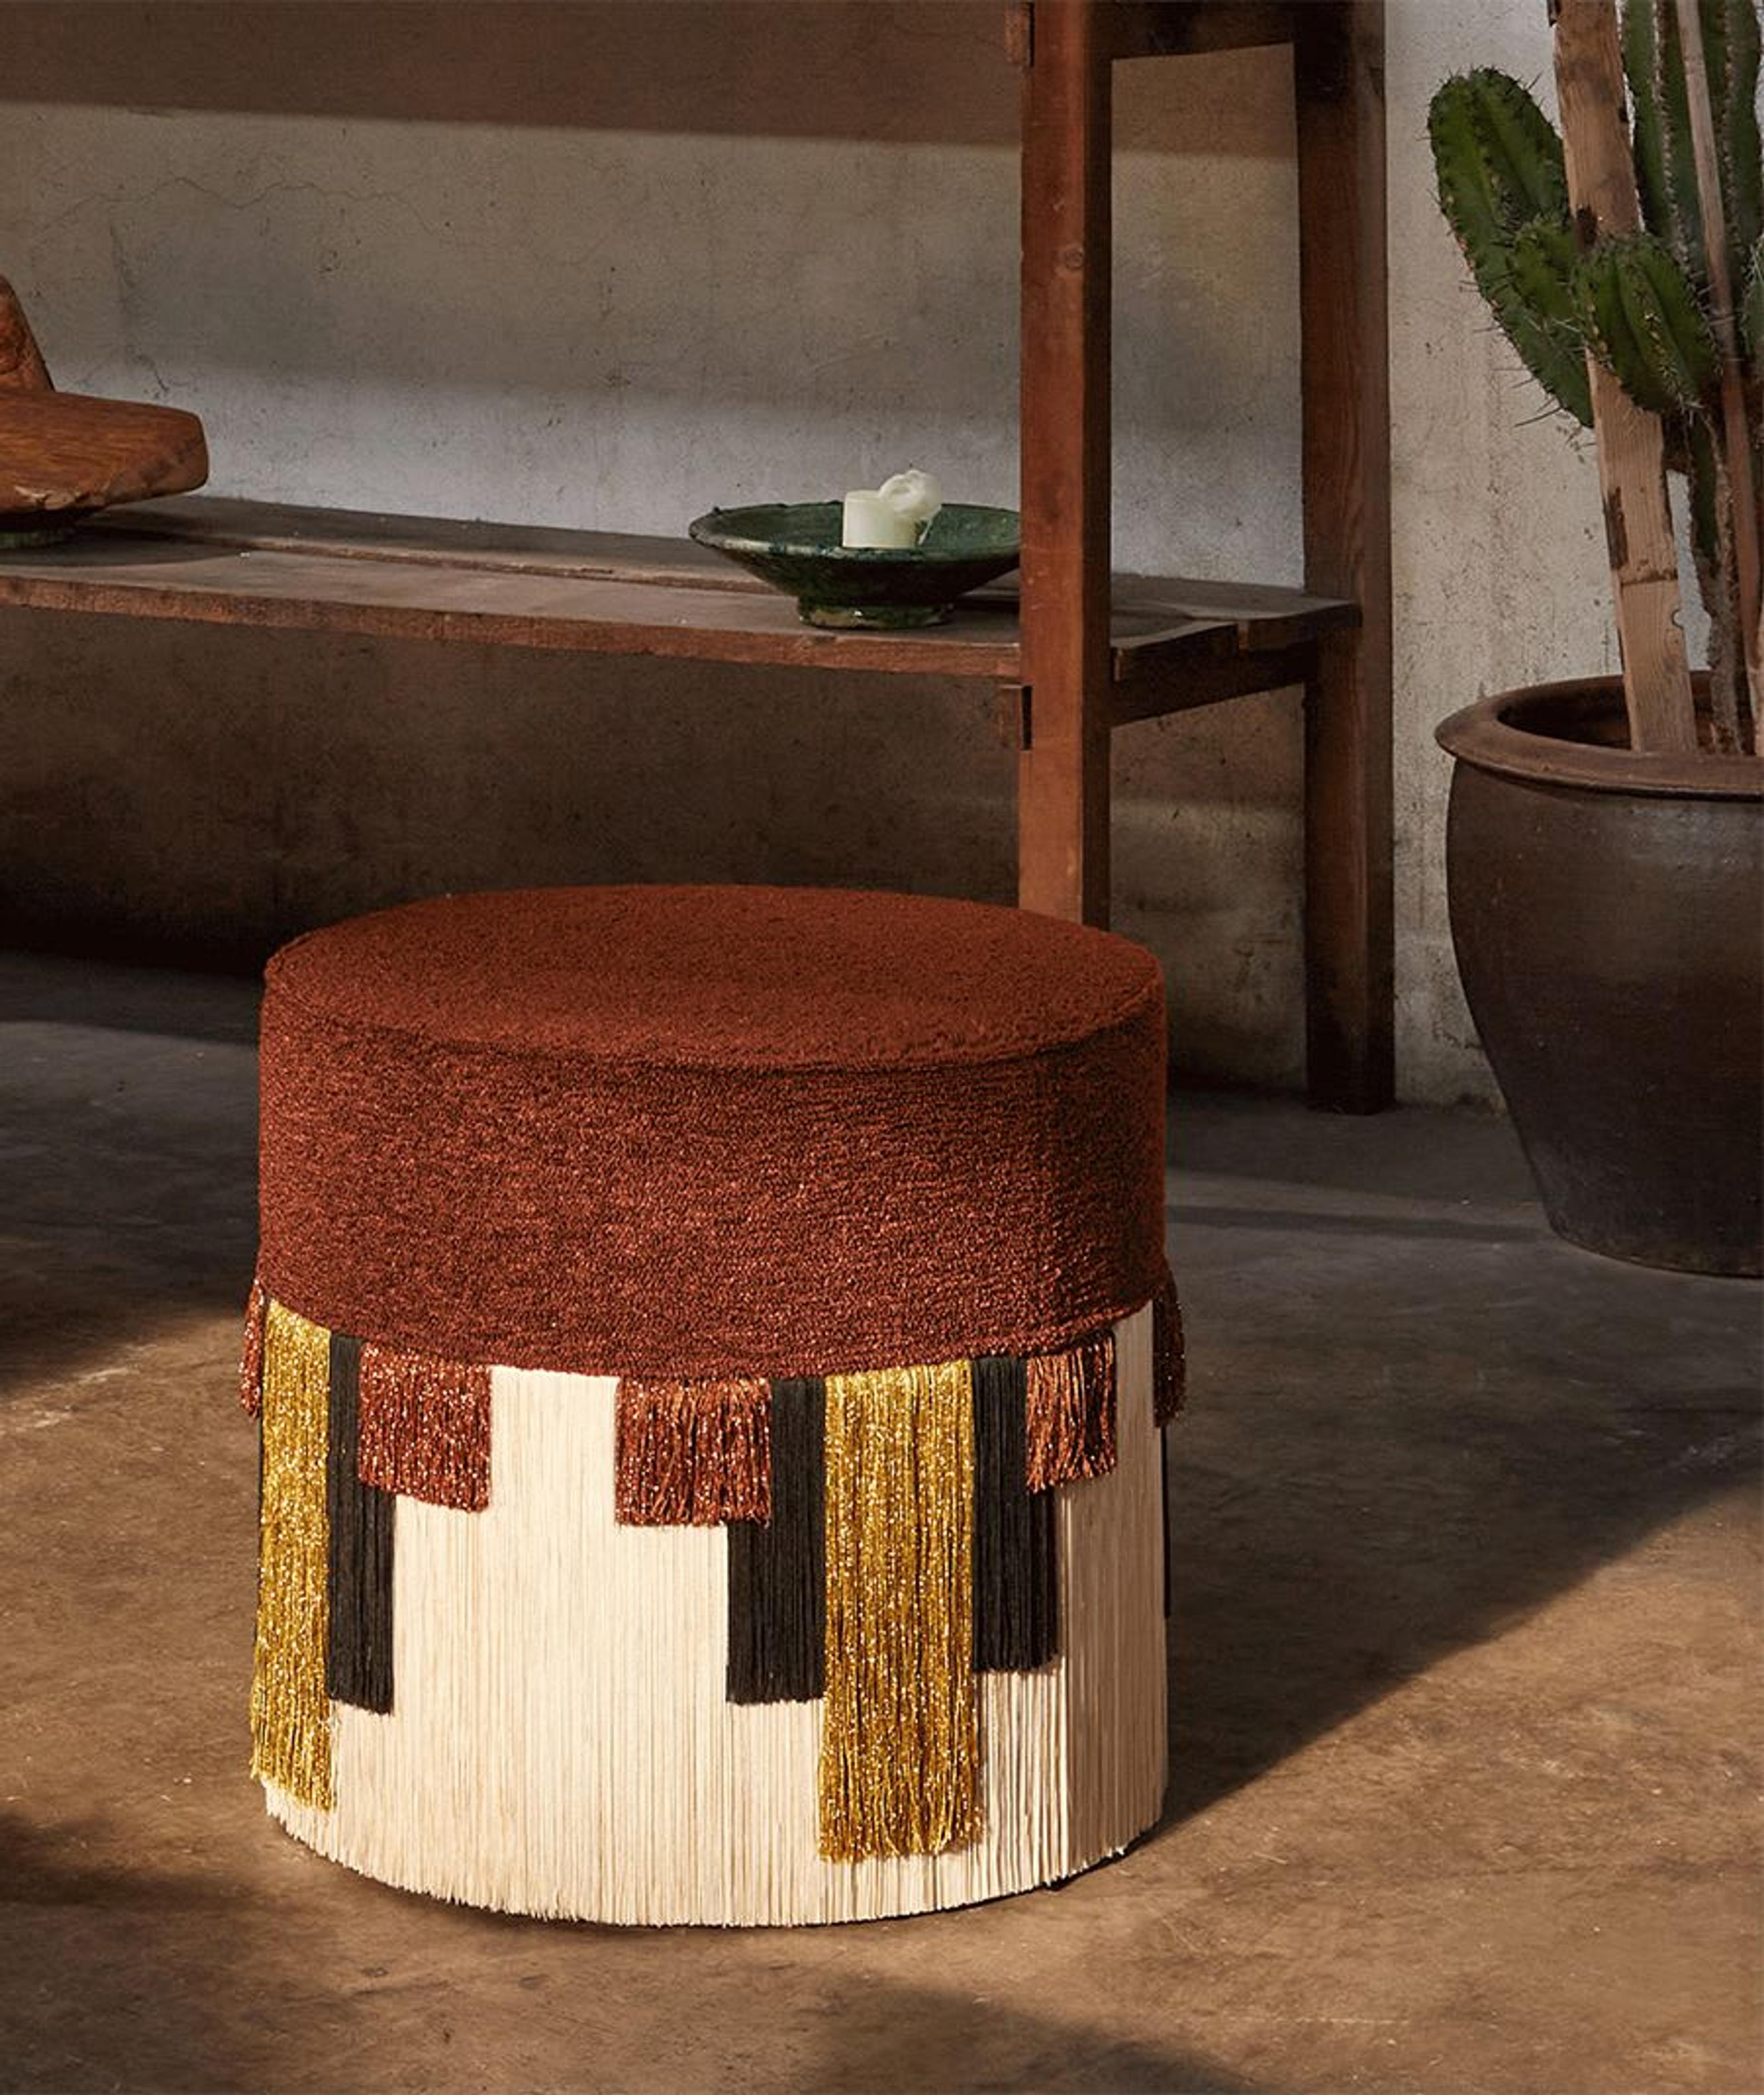 One of many Lorenza Bozzoli's superb accessories, showcasing an earthy brown upholstered seat, complemented by a geometric pattern fringe skirt in viscose and lurex